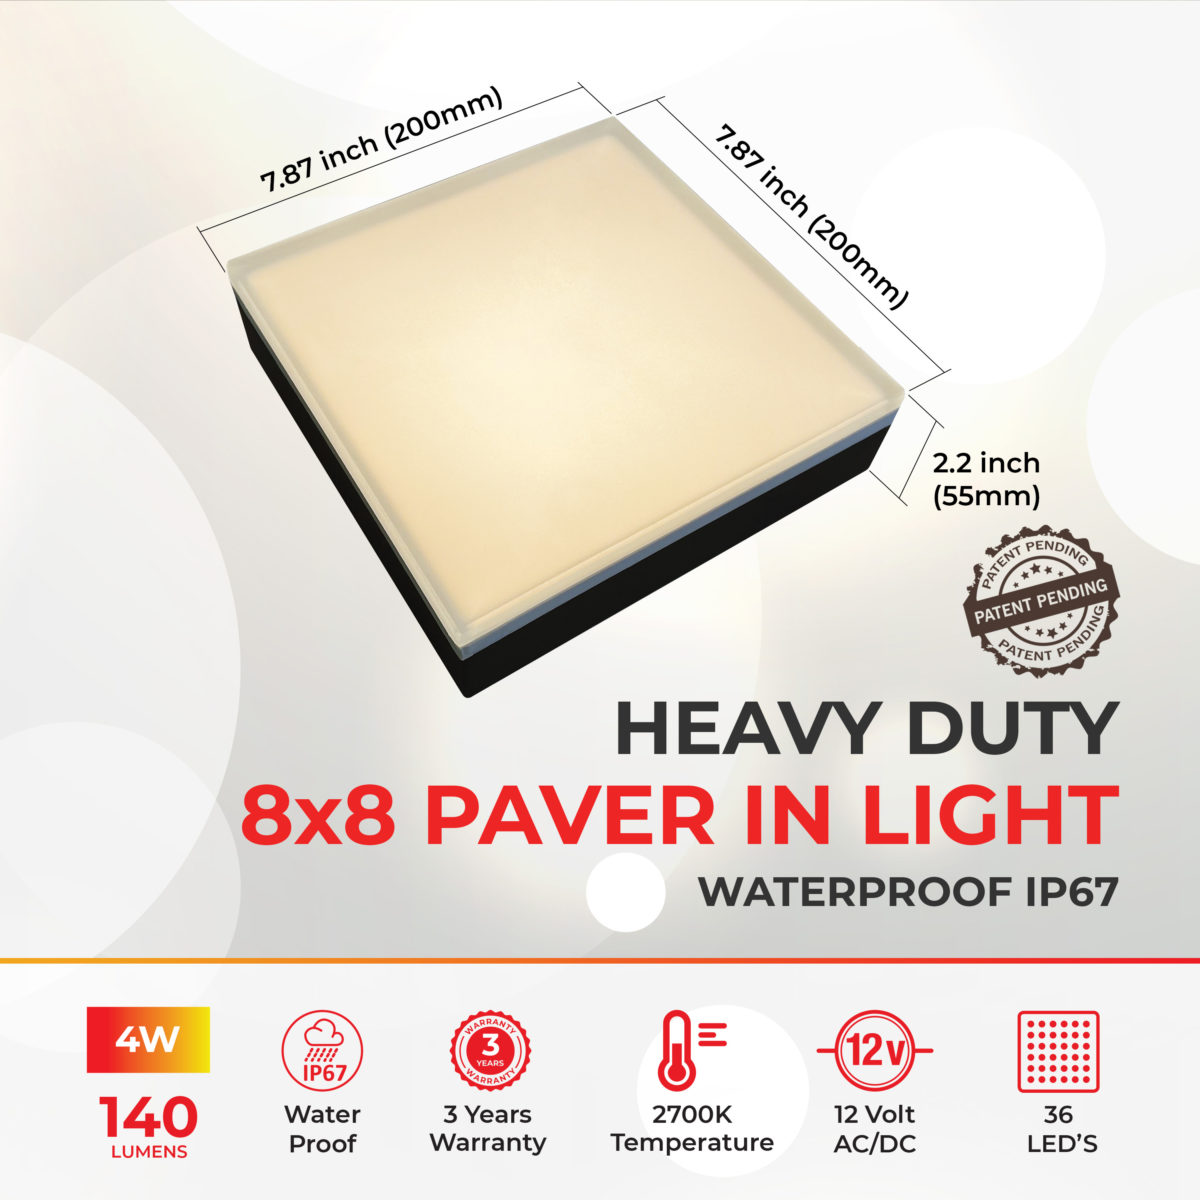 Dimensions of the 8x8 Inch Glare-Free Paver Light - Perfect fit for standard 9x9 inch pavers (7.87 inch x 7.87 inch)